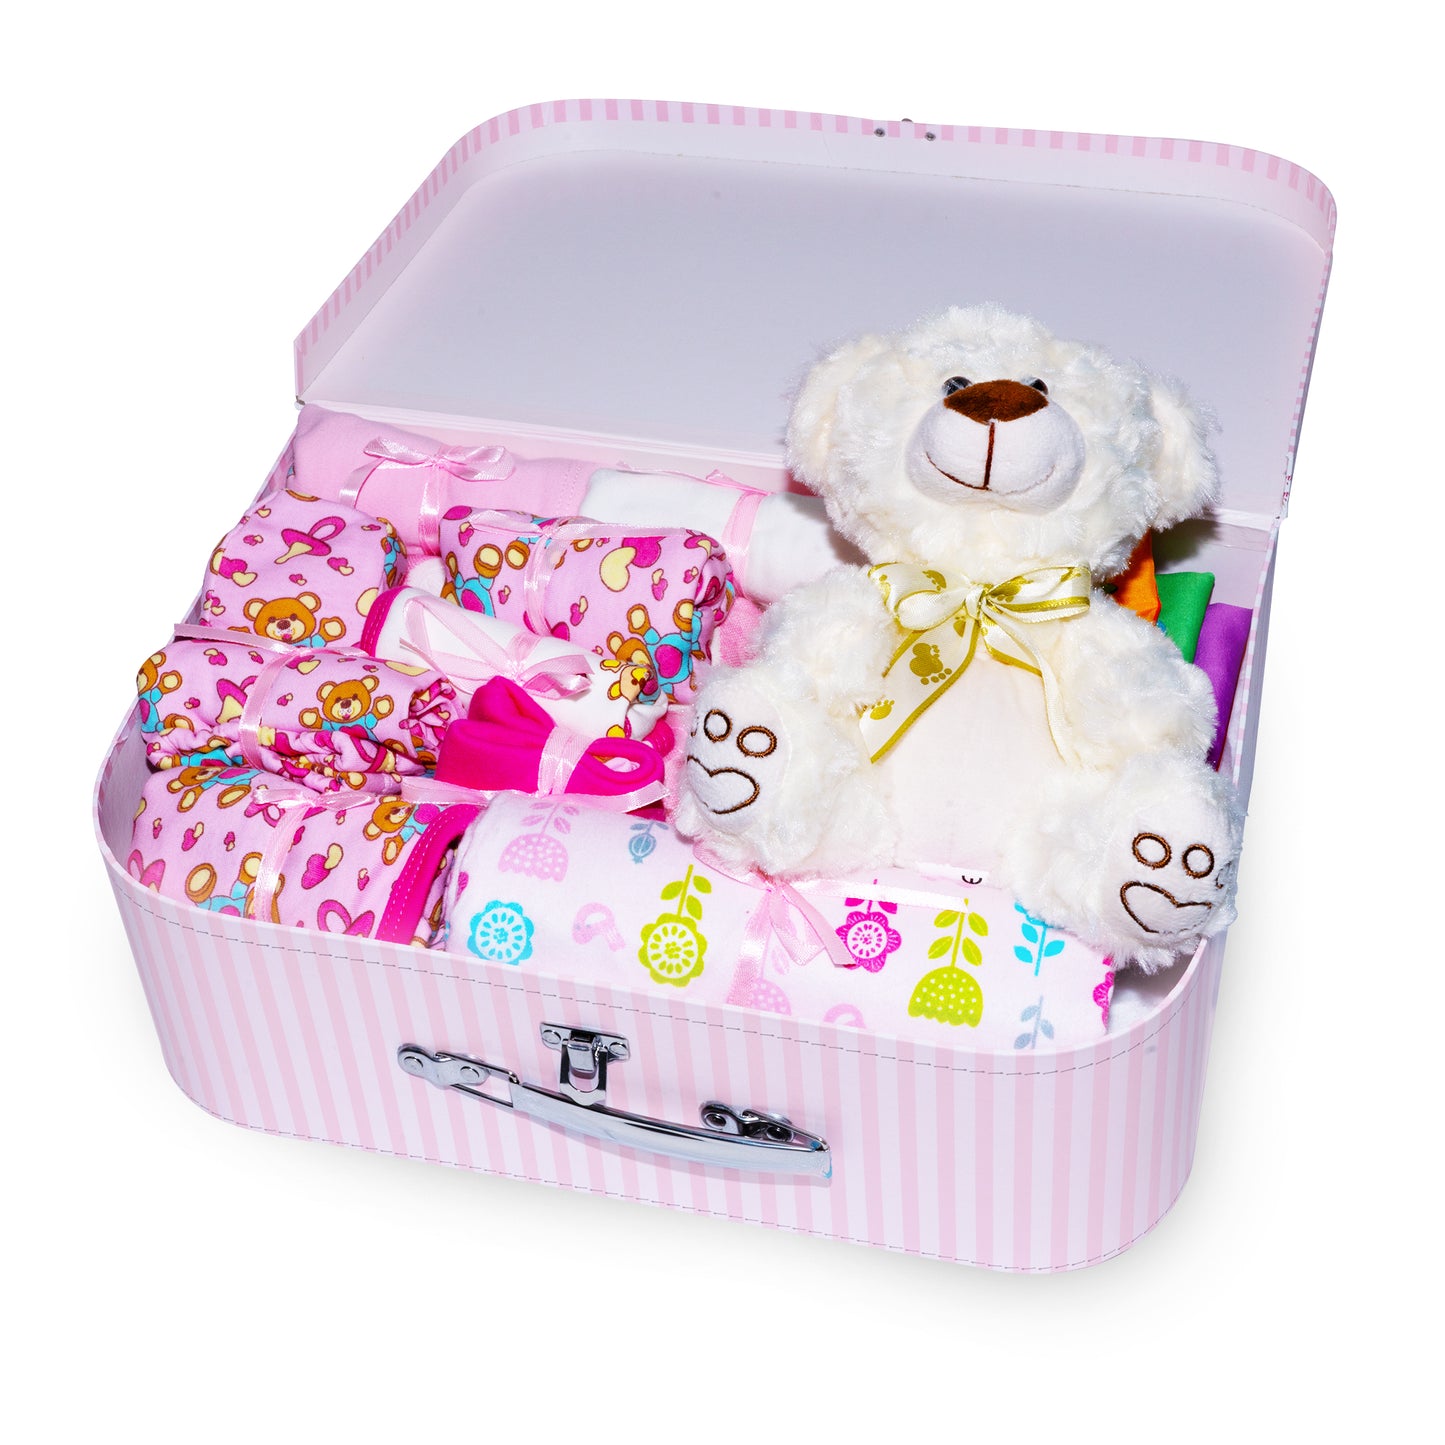 Welcome to The World Baby New Baby Girl Gift Set, Baby Basket Gift Essentials in Unique Keepsake Suitcase Box, Pink/Large